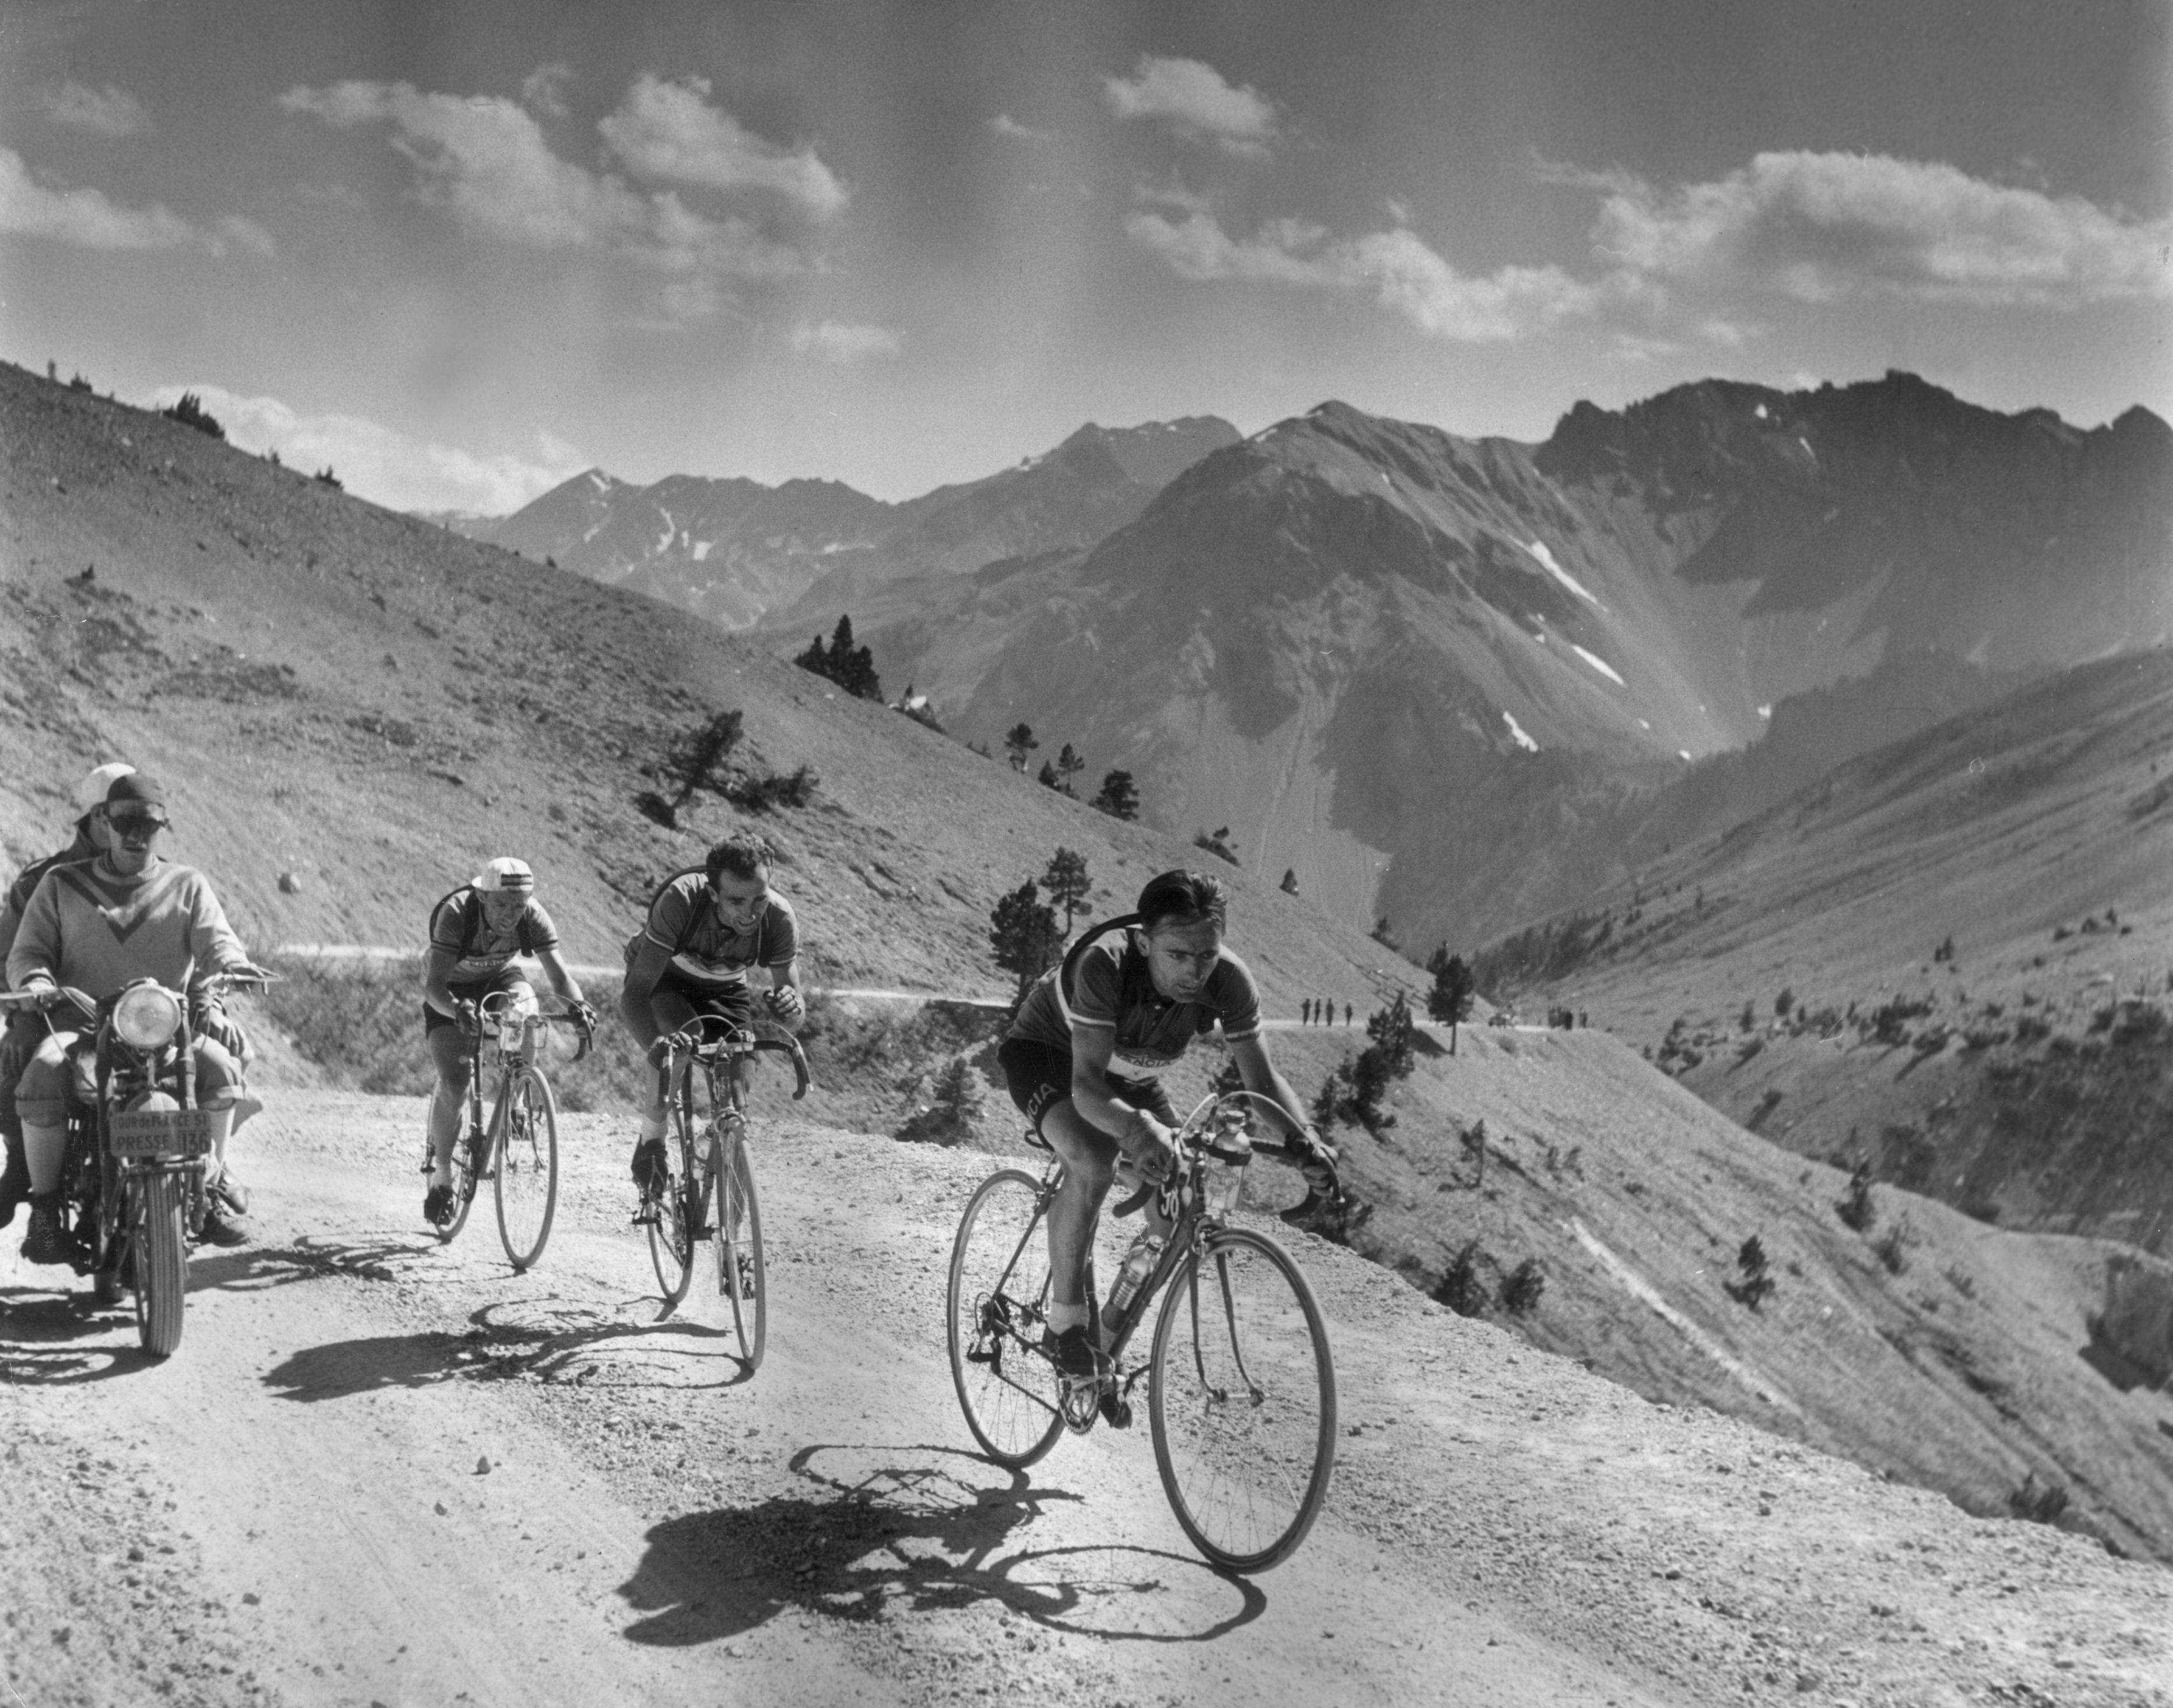 August 18, 1951: Cyclists competing in the Tour de France riding through the French Alps. Original Publication: Picture Post - 5381 - The Greatest Show On Earth - pub. 1951 (Picture Post/Getty Images)

As an authorized Getty Images Gallery partner,